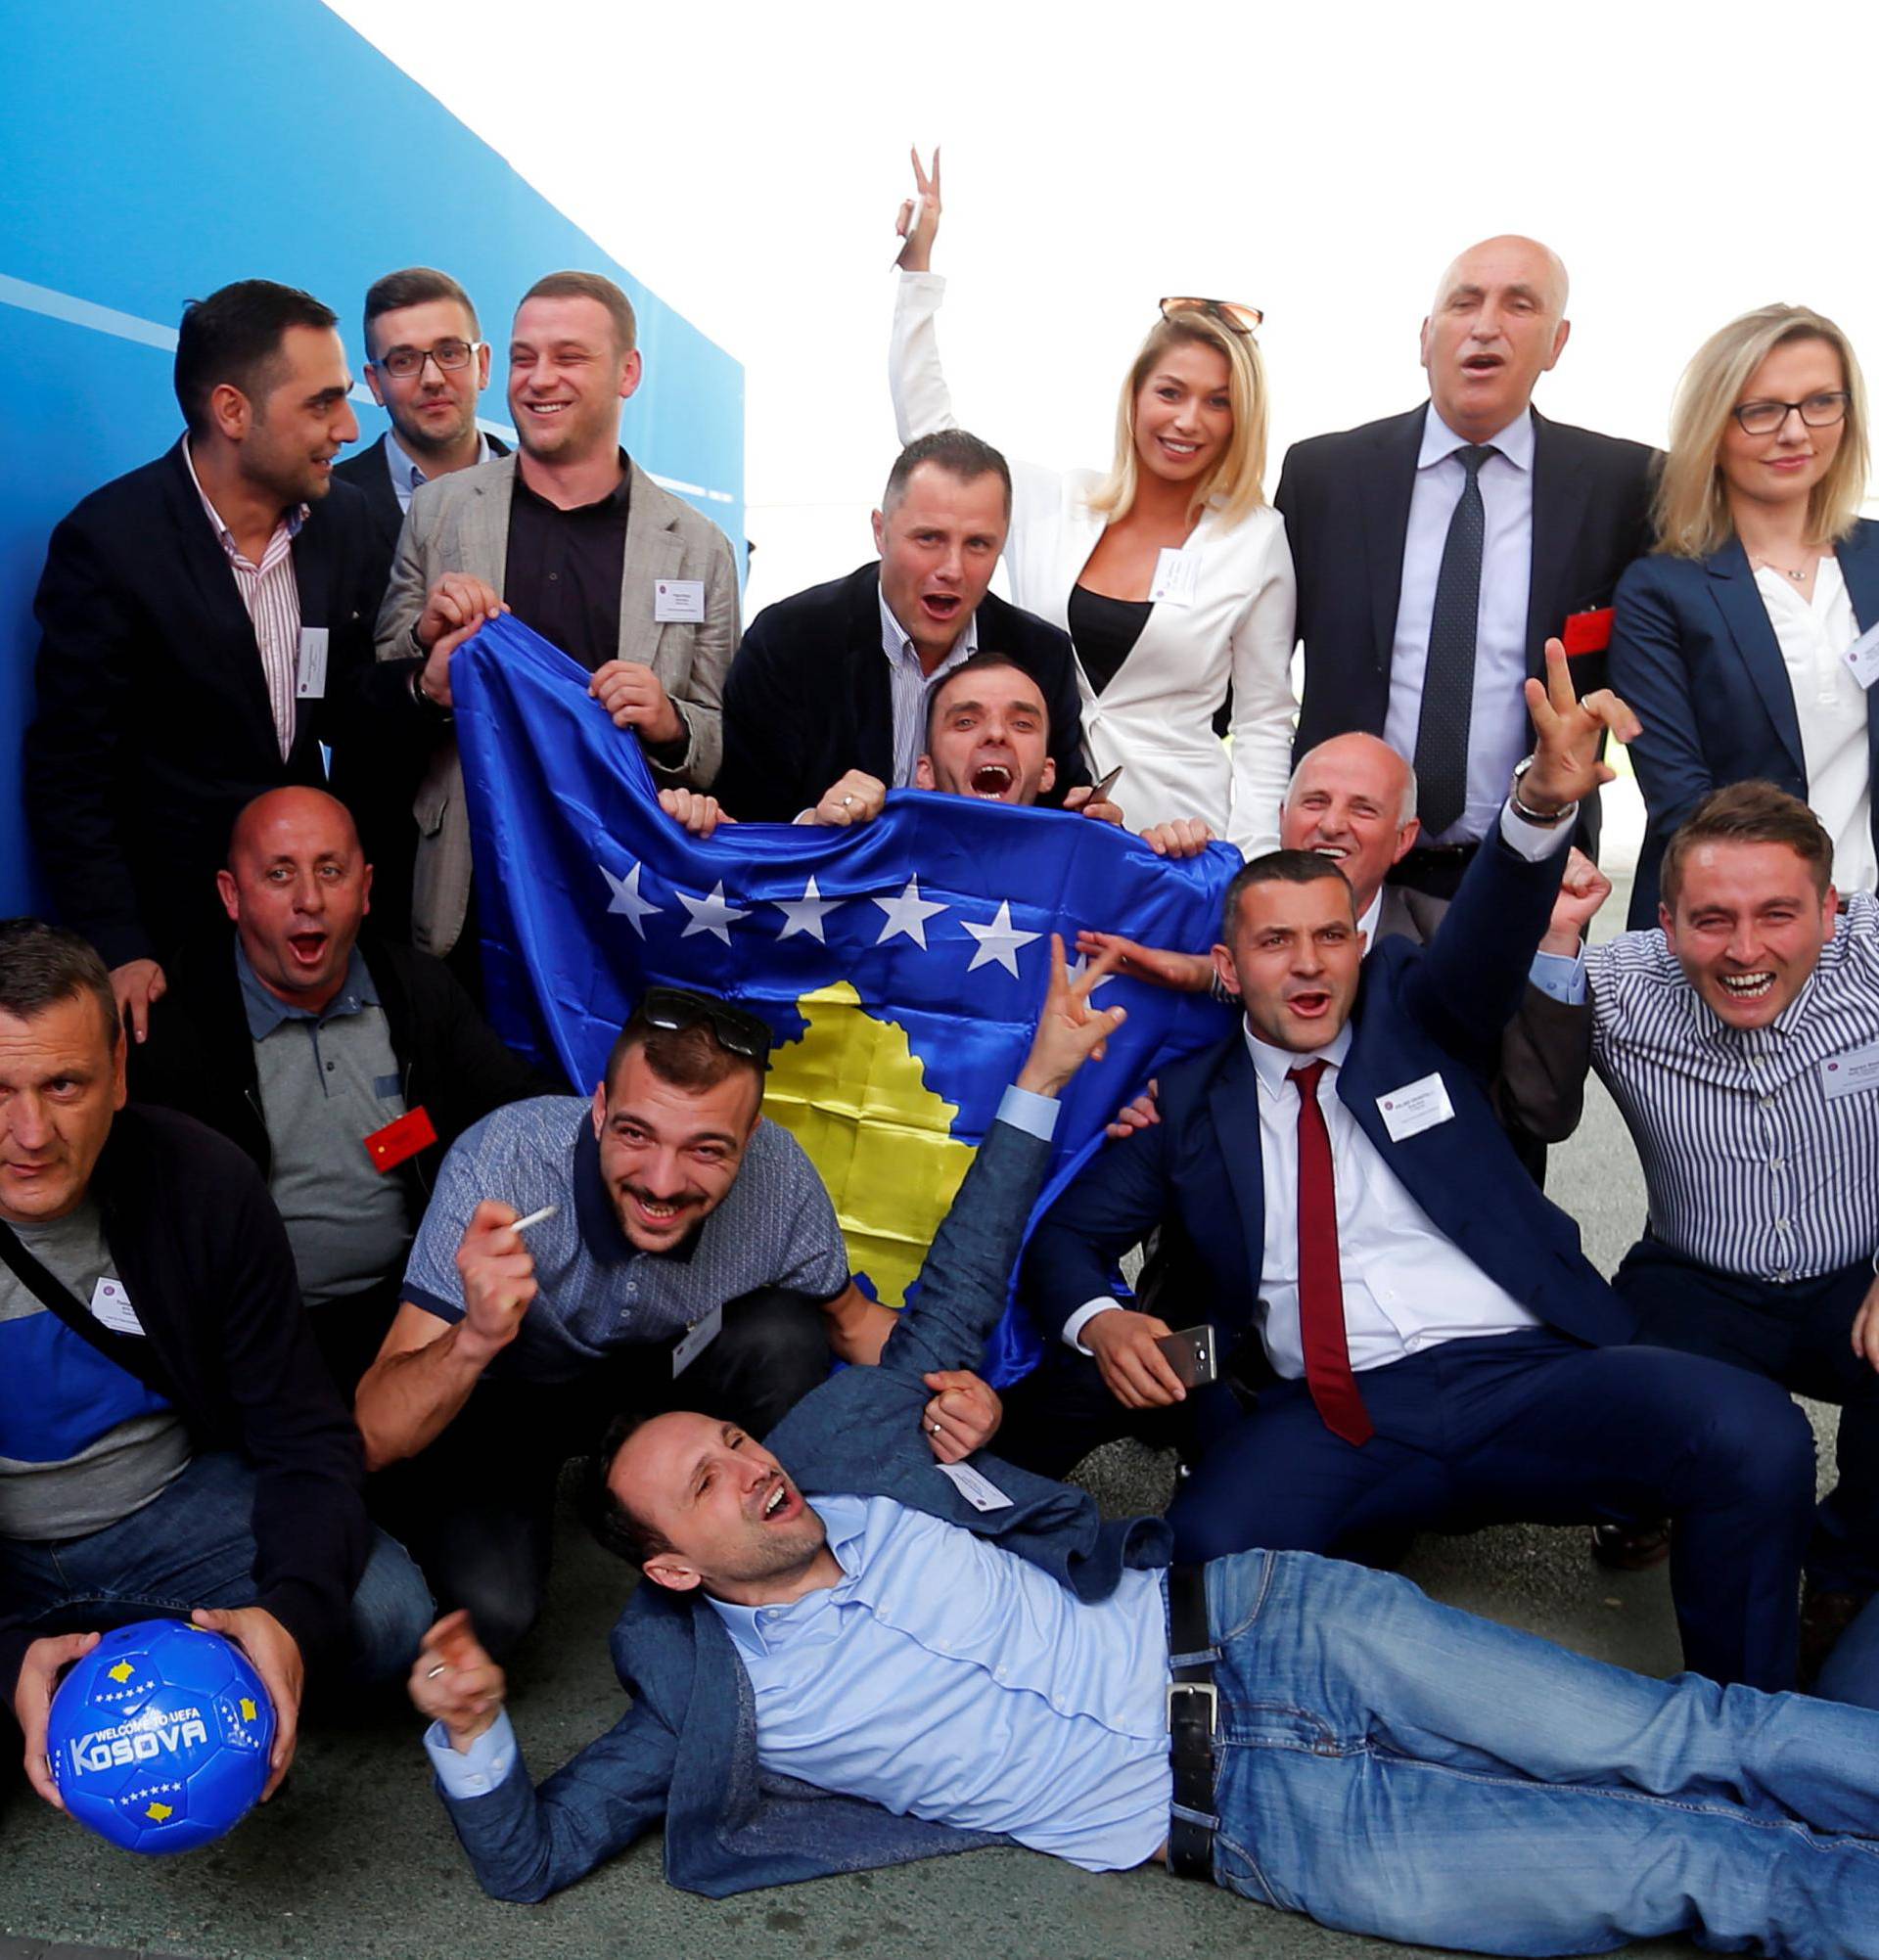 Members of the Kosovo media team celebrate outside the convention centre where the European football group UEFA admitted Kosovo as its newest member in Budapest